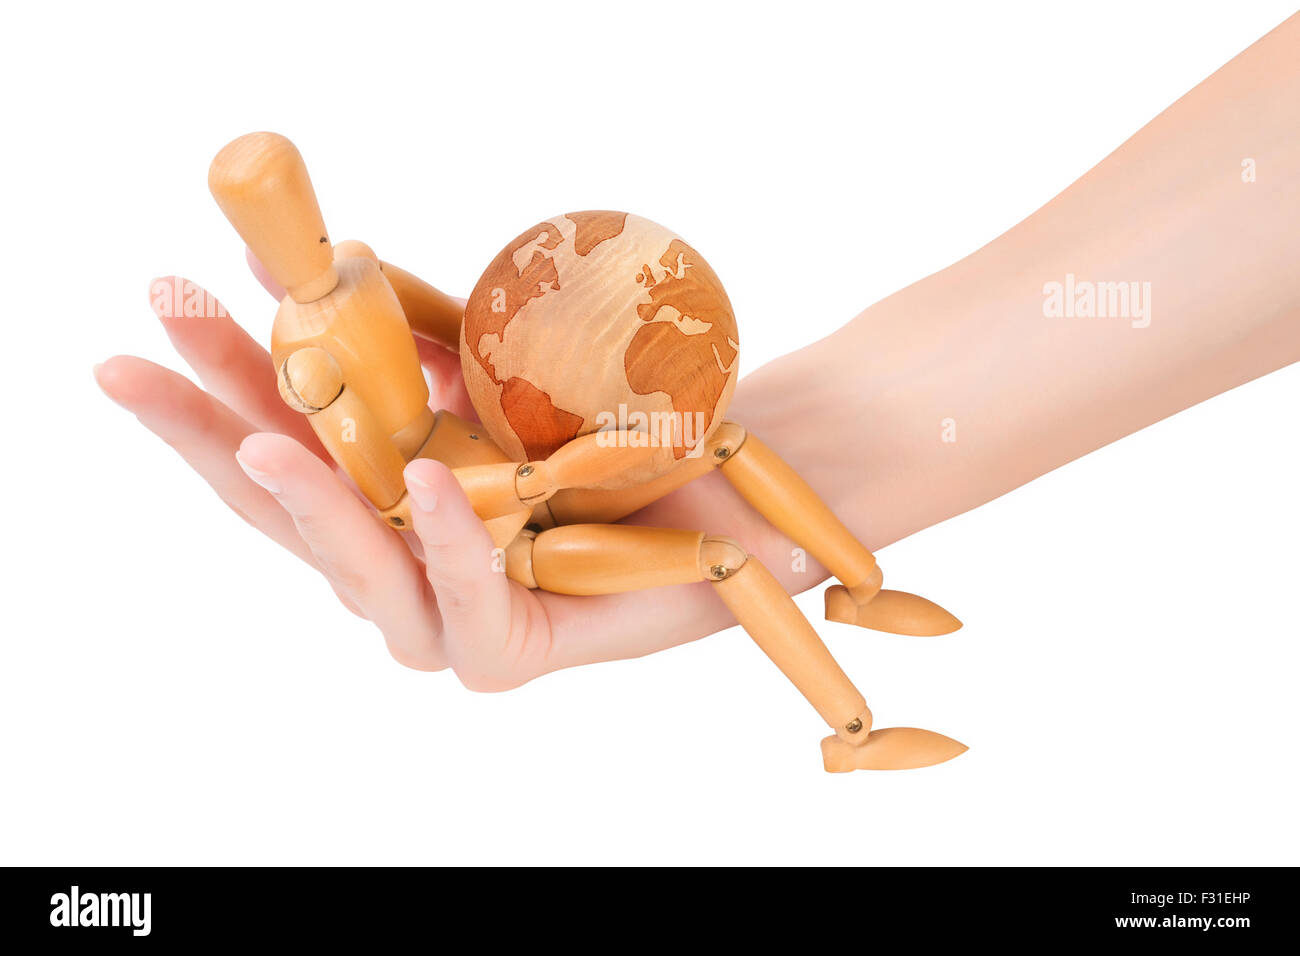 beautiful female hand holding a wooden dummy holding a wooden globe isolated on white with clipping path. concept Stock Photo